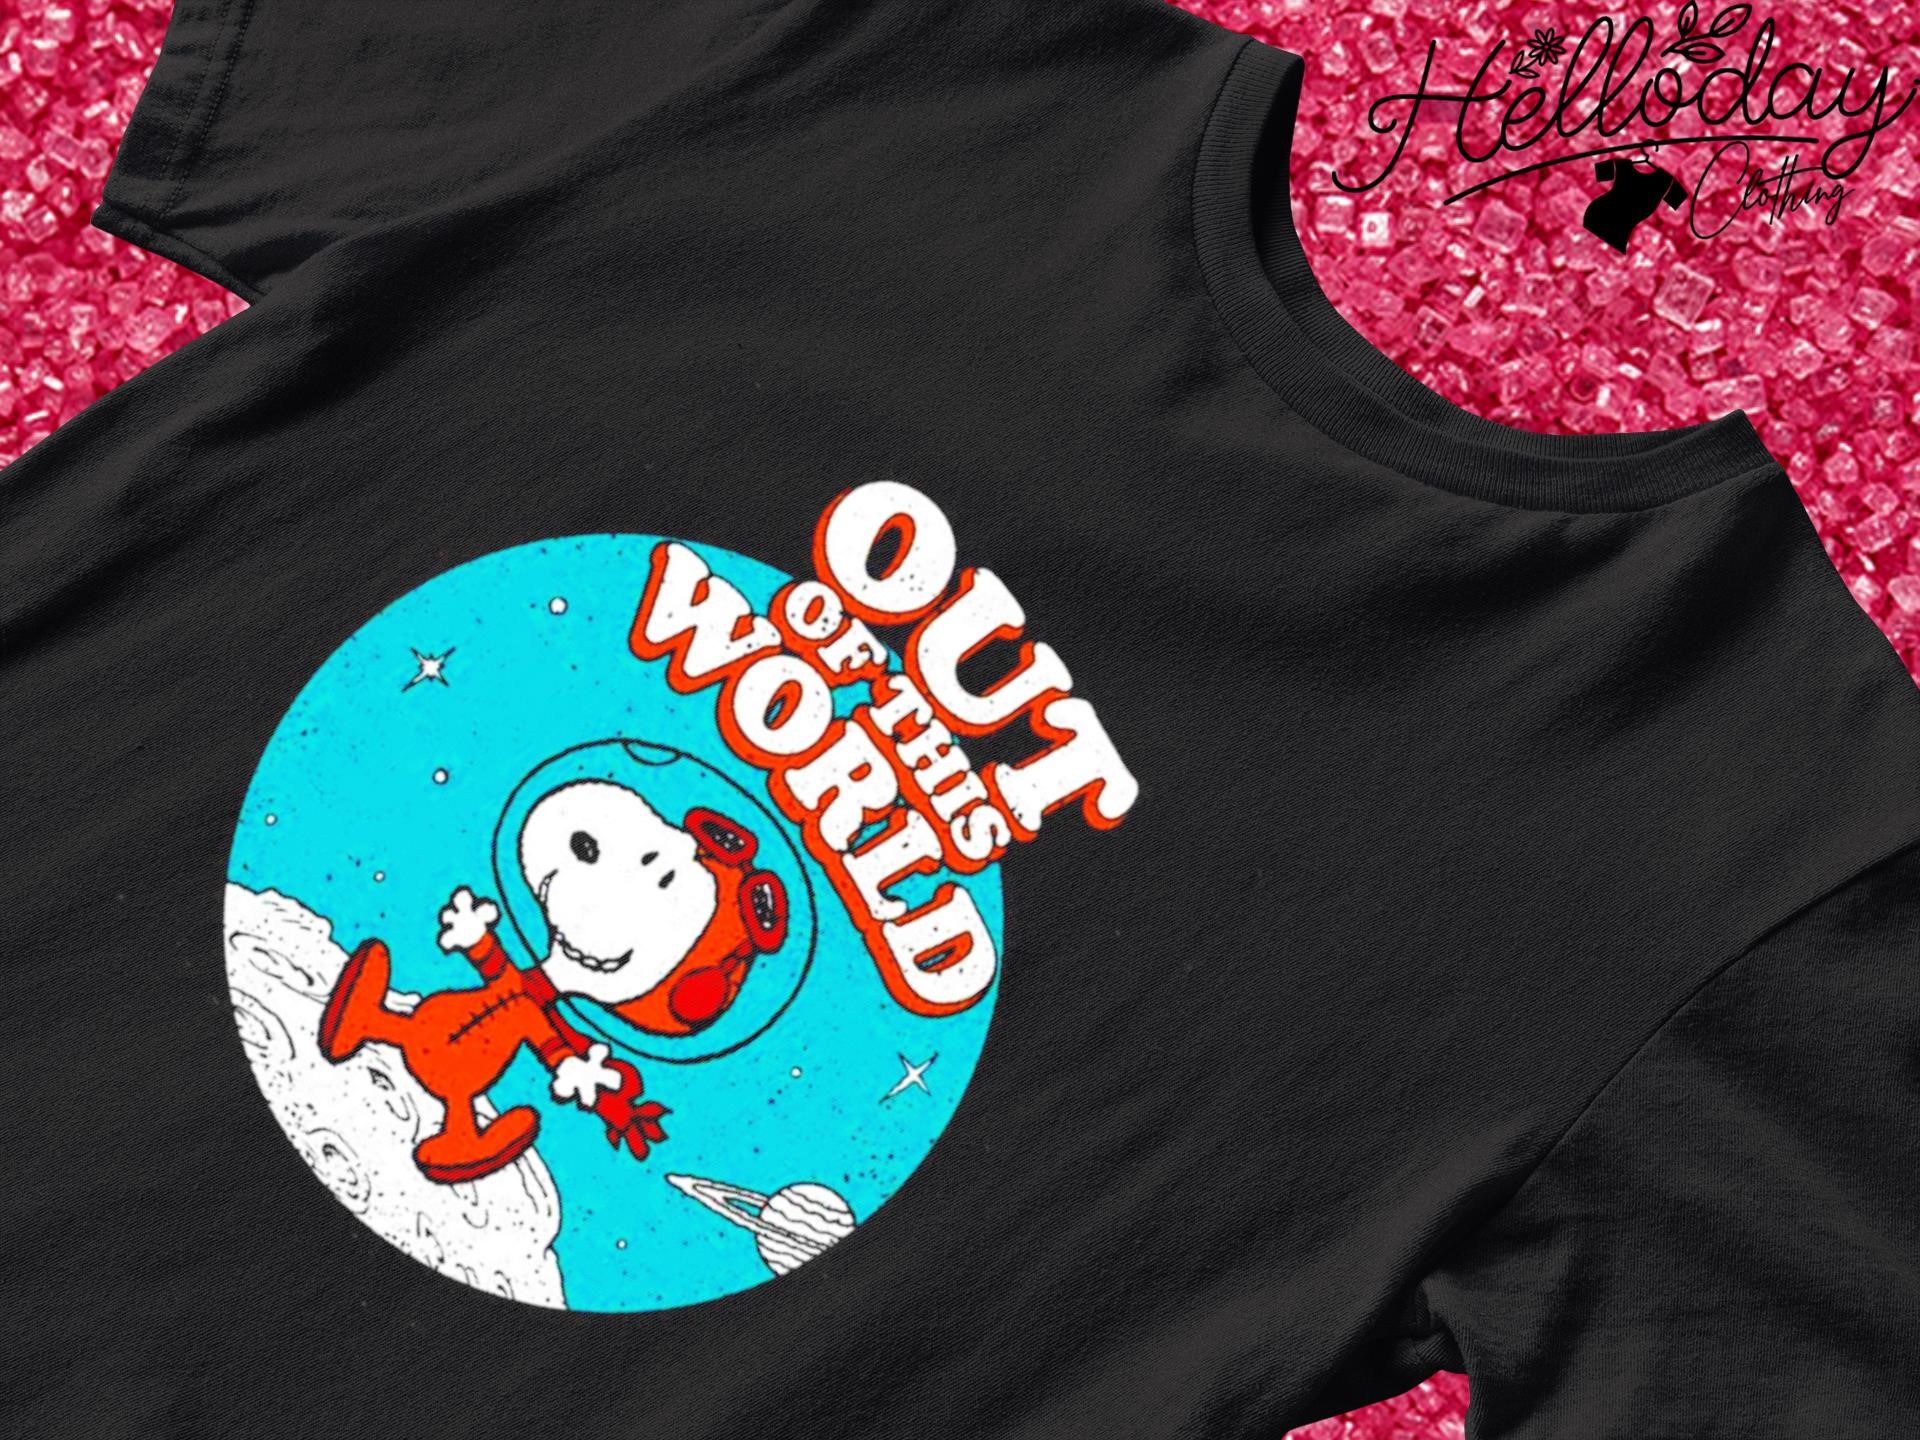 Peanuts out of this world shirt